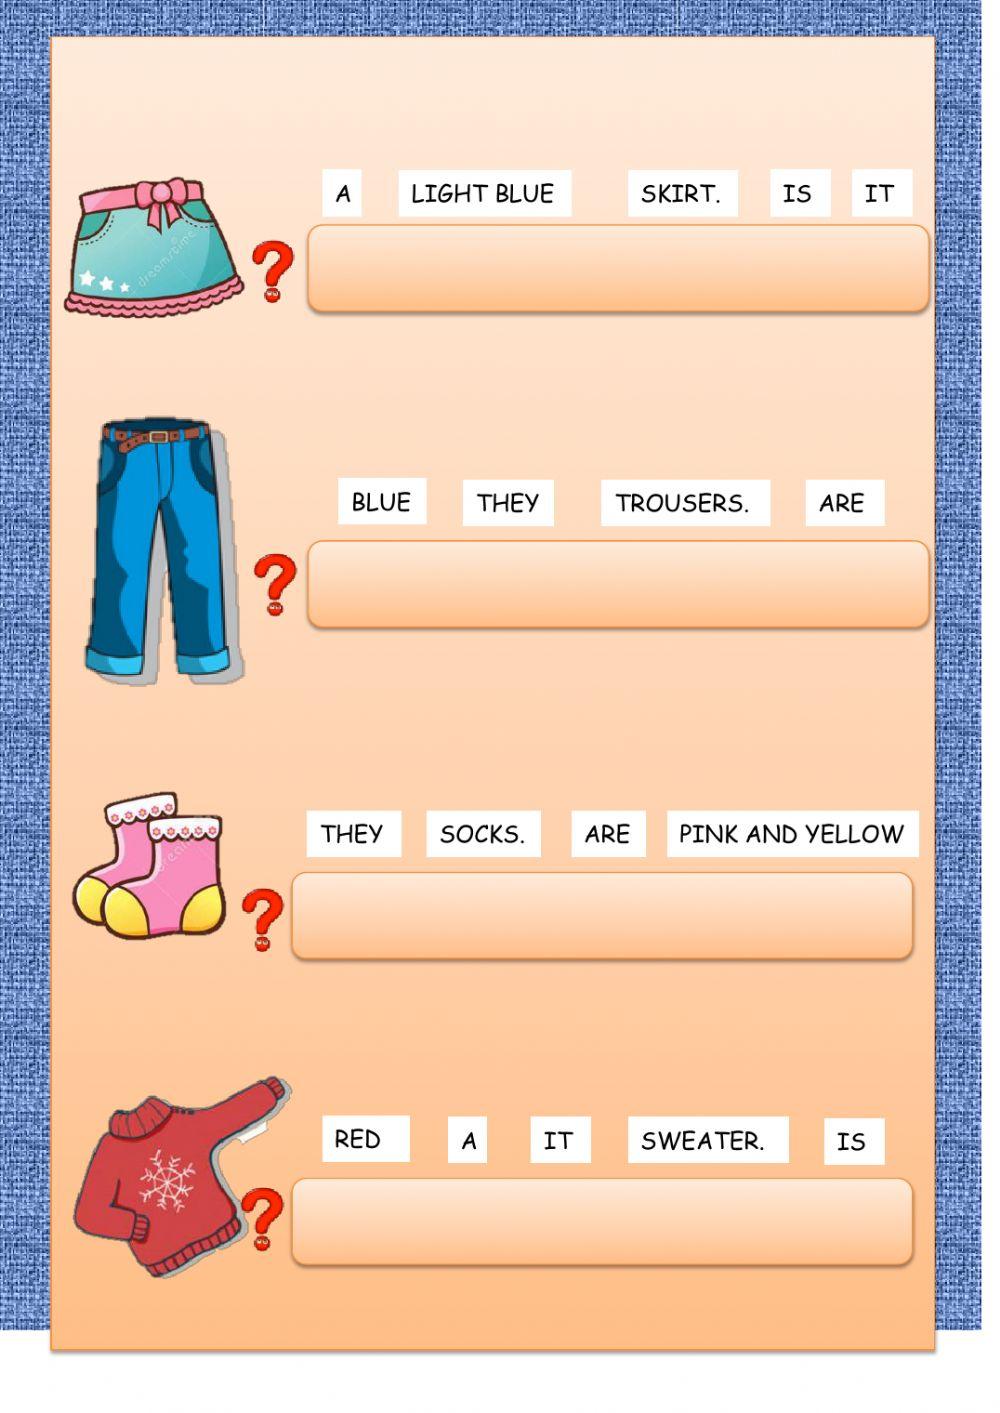 CLOTHES word order